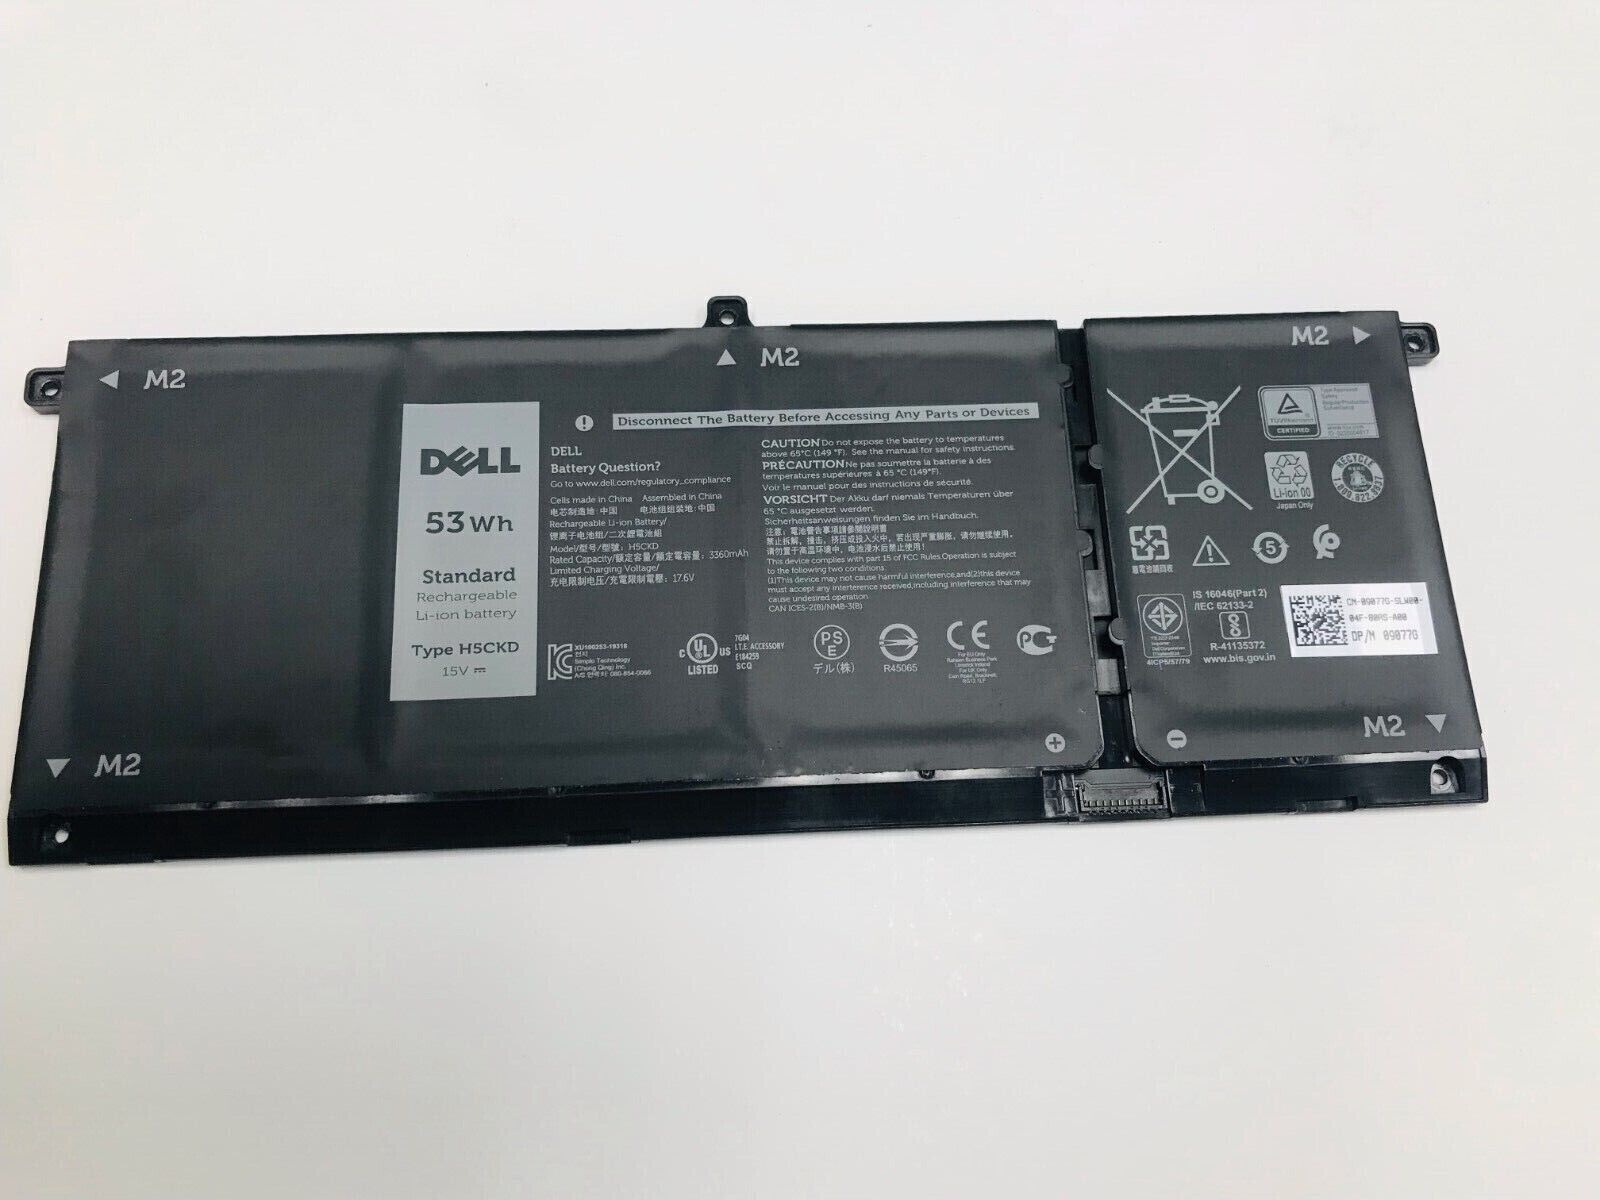 NEW Genuine Dell Latitude 3410 3510 Inspiron 5505 53Wh 4 Cell Battery H5CKD